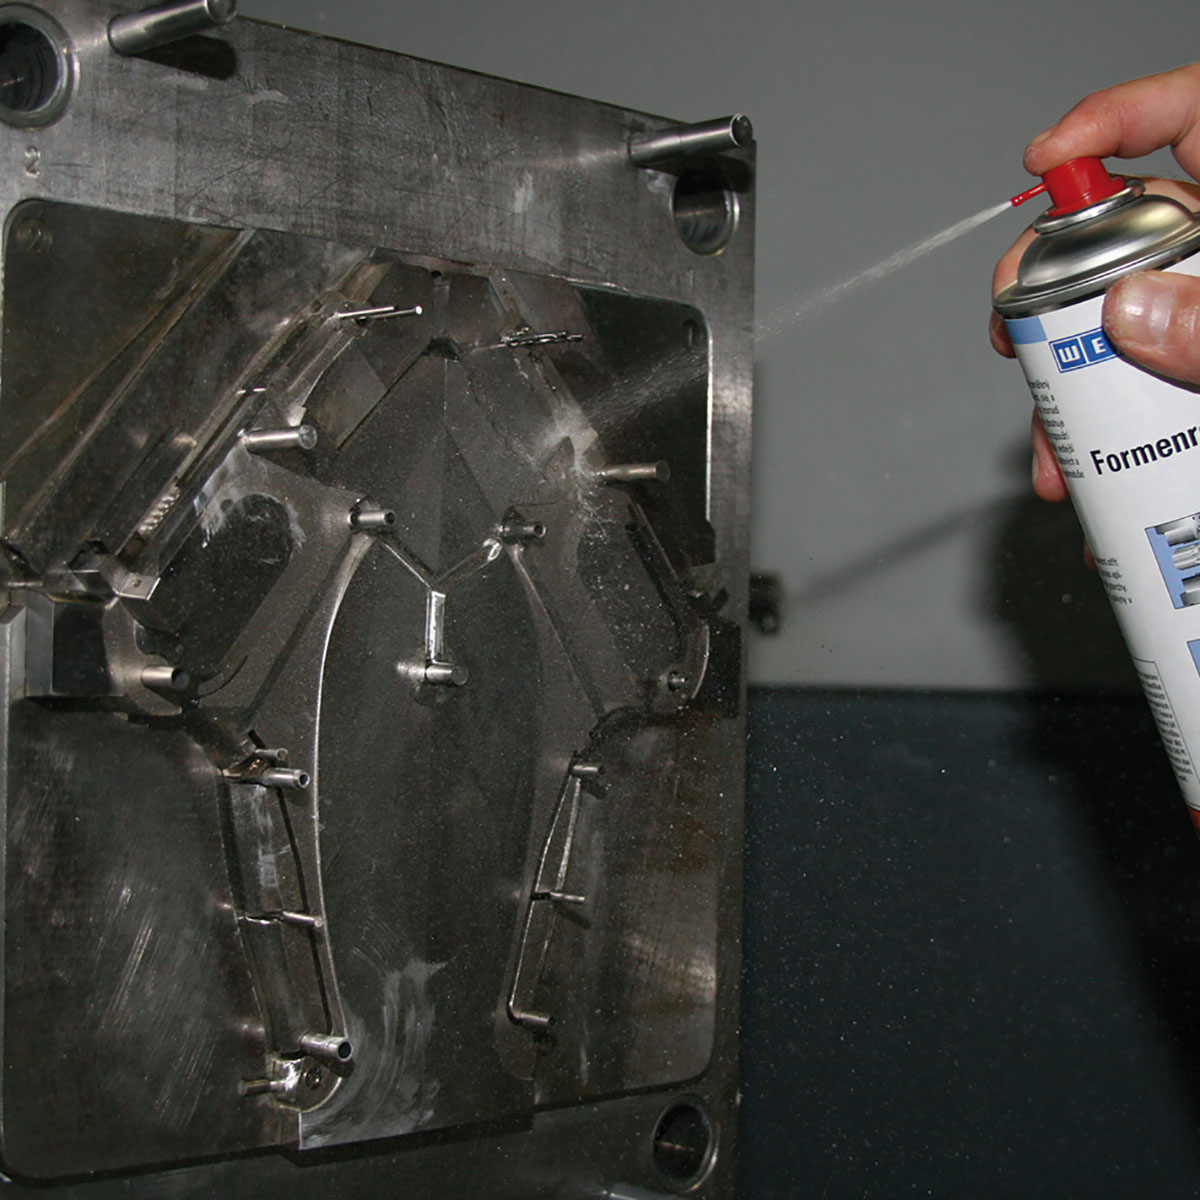 Weicon Mould Cleaner Spray Used to Clean a Metal Mould